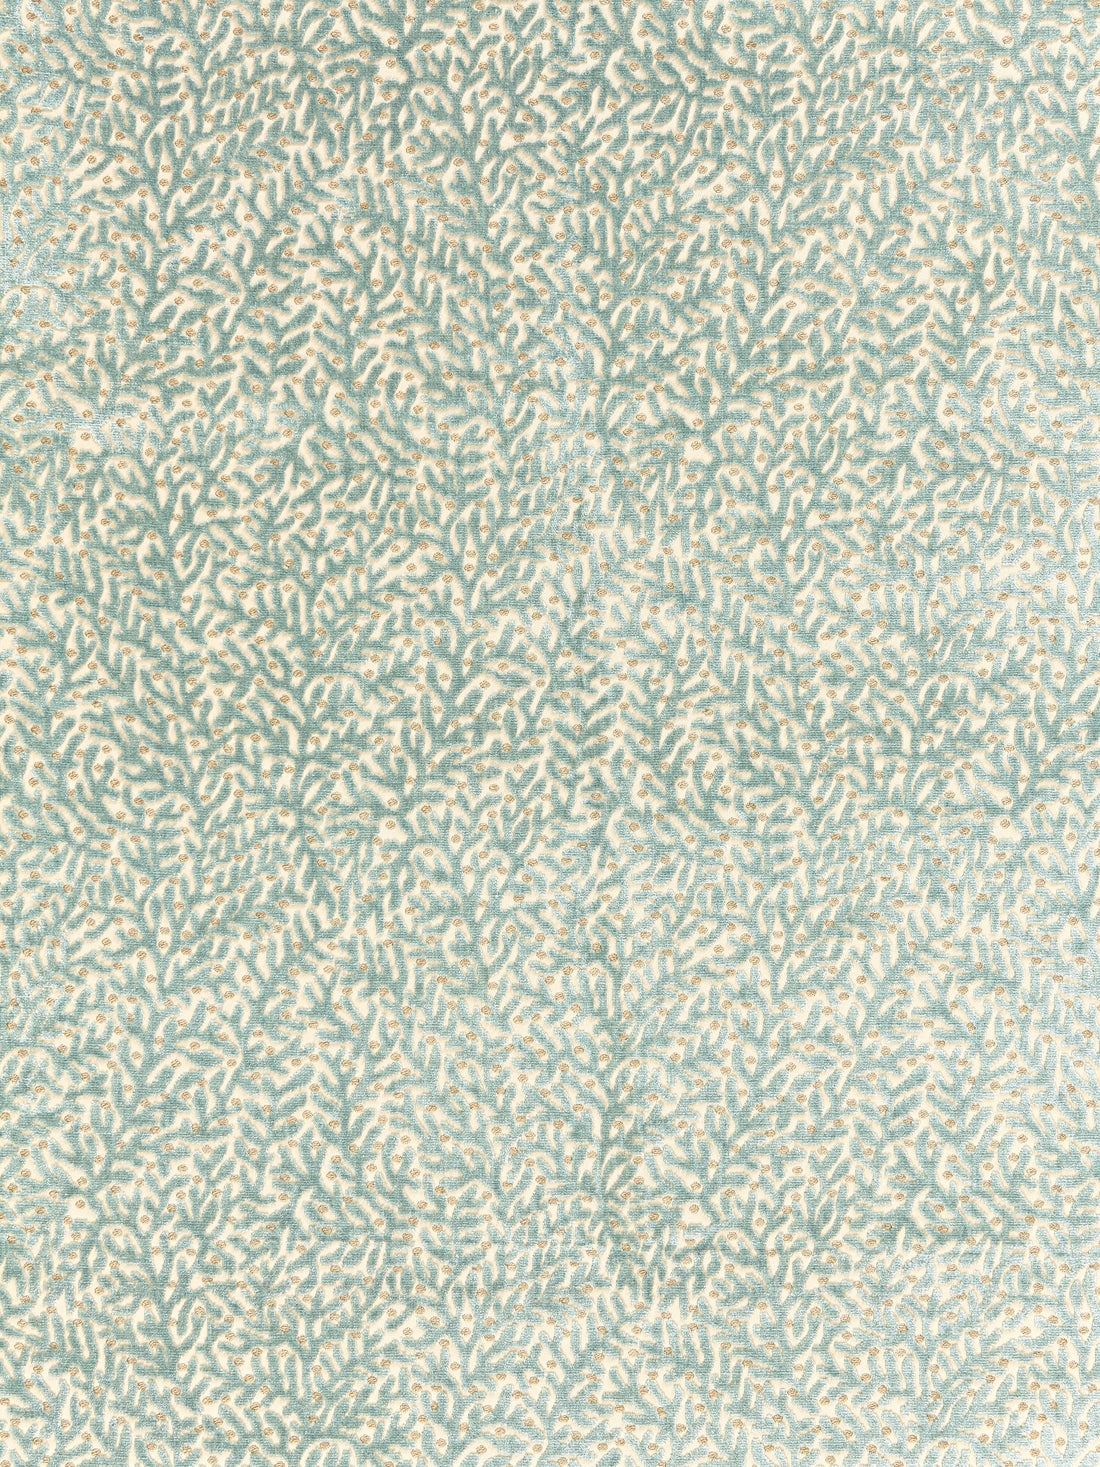 Corallina Velvet fabric in lagoon color - pattern number SC 000327077 - by Scalamandre in the Scalamandre Fabrics Book 1 collection